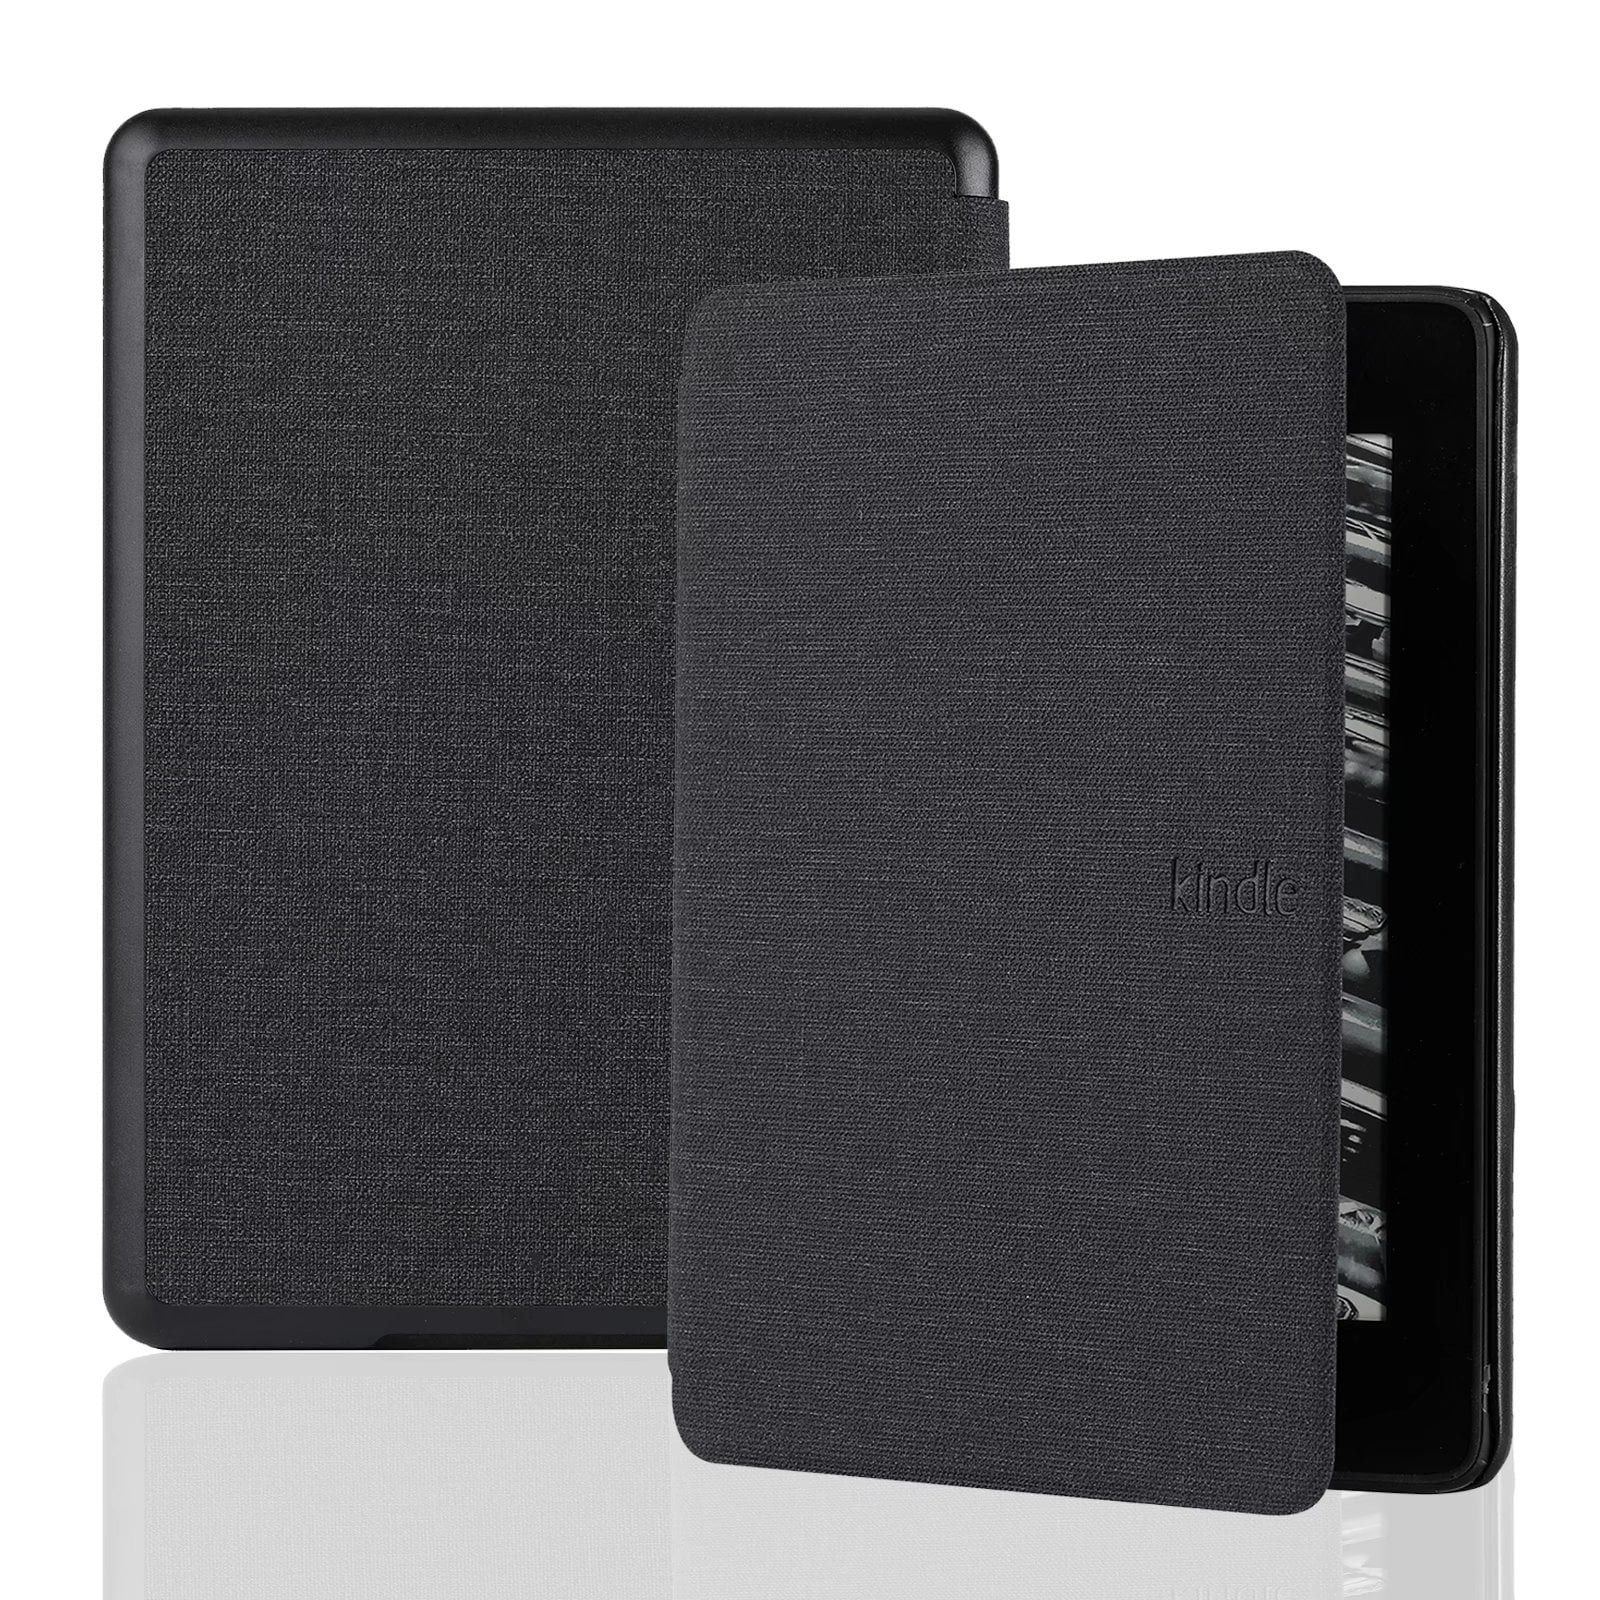 Tablet For Capa Kindle 11 Generation 2022 Case 6 Bussiness Stand Wallet  Cover for funda para kindle 2022 6 Inch C2V2L3 Case - AliExpress